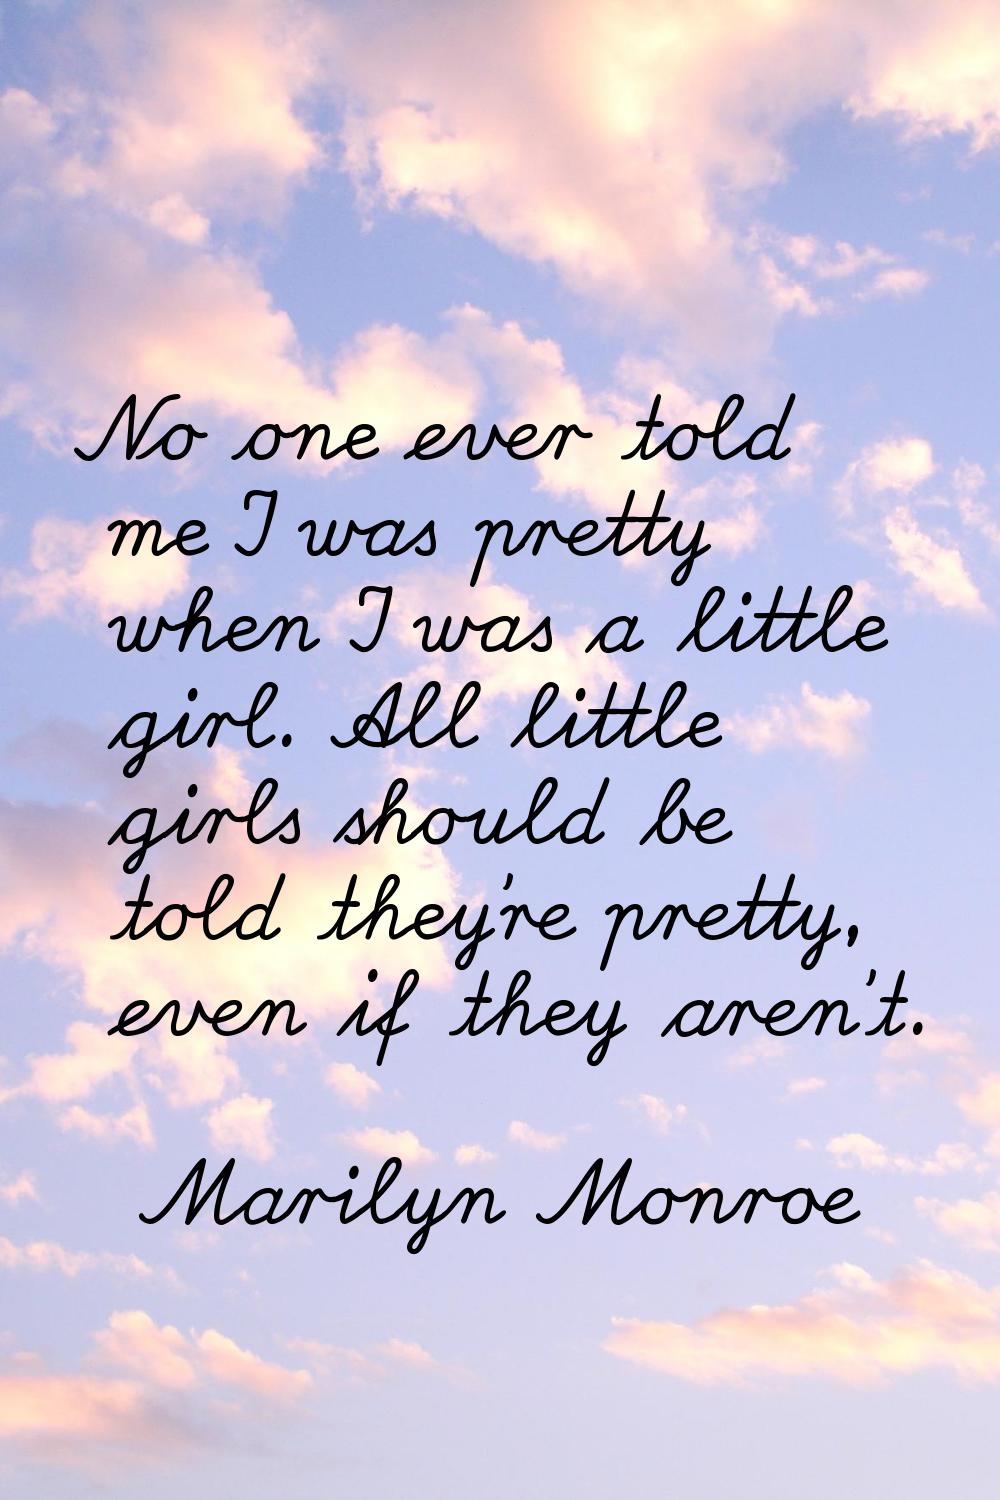 No one ever told me I was pretty when I was a little girl. All little girls should be told they're 